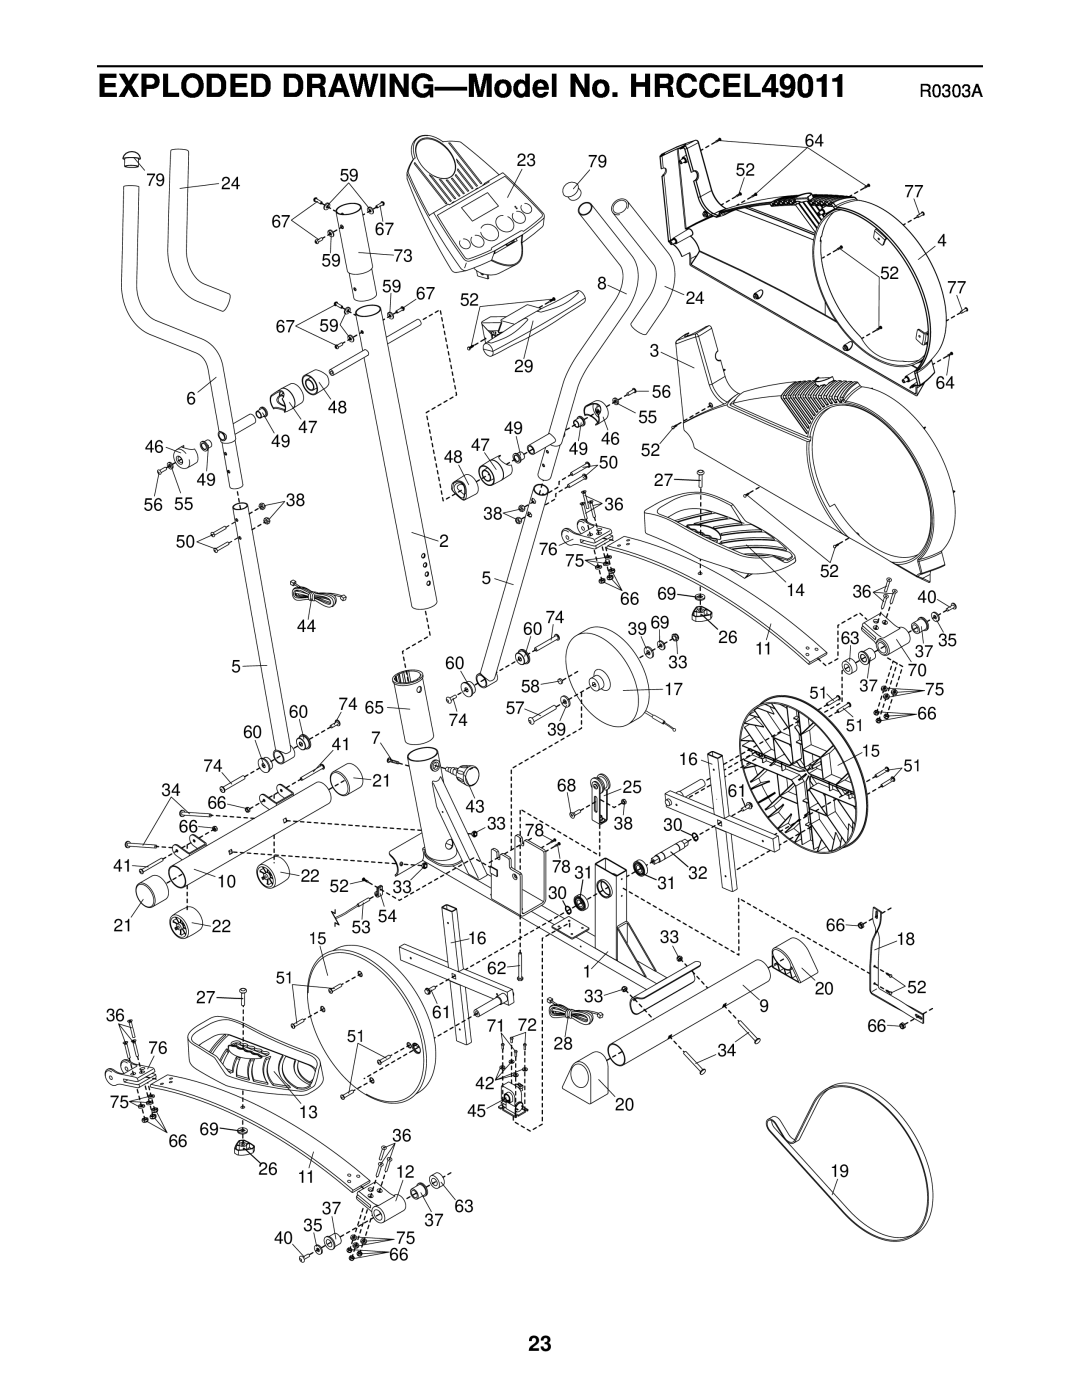 Healthrider manual EXPLODED DRAWING-Model No. HRCCEL49011, R0303A 